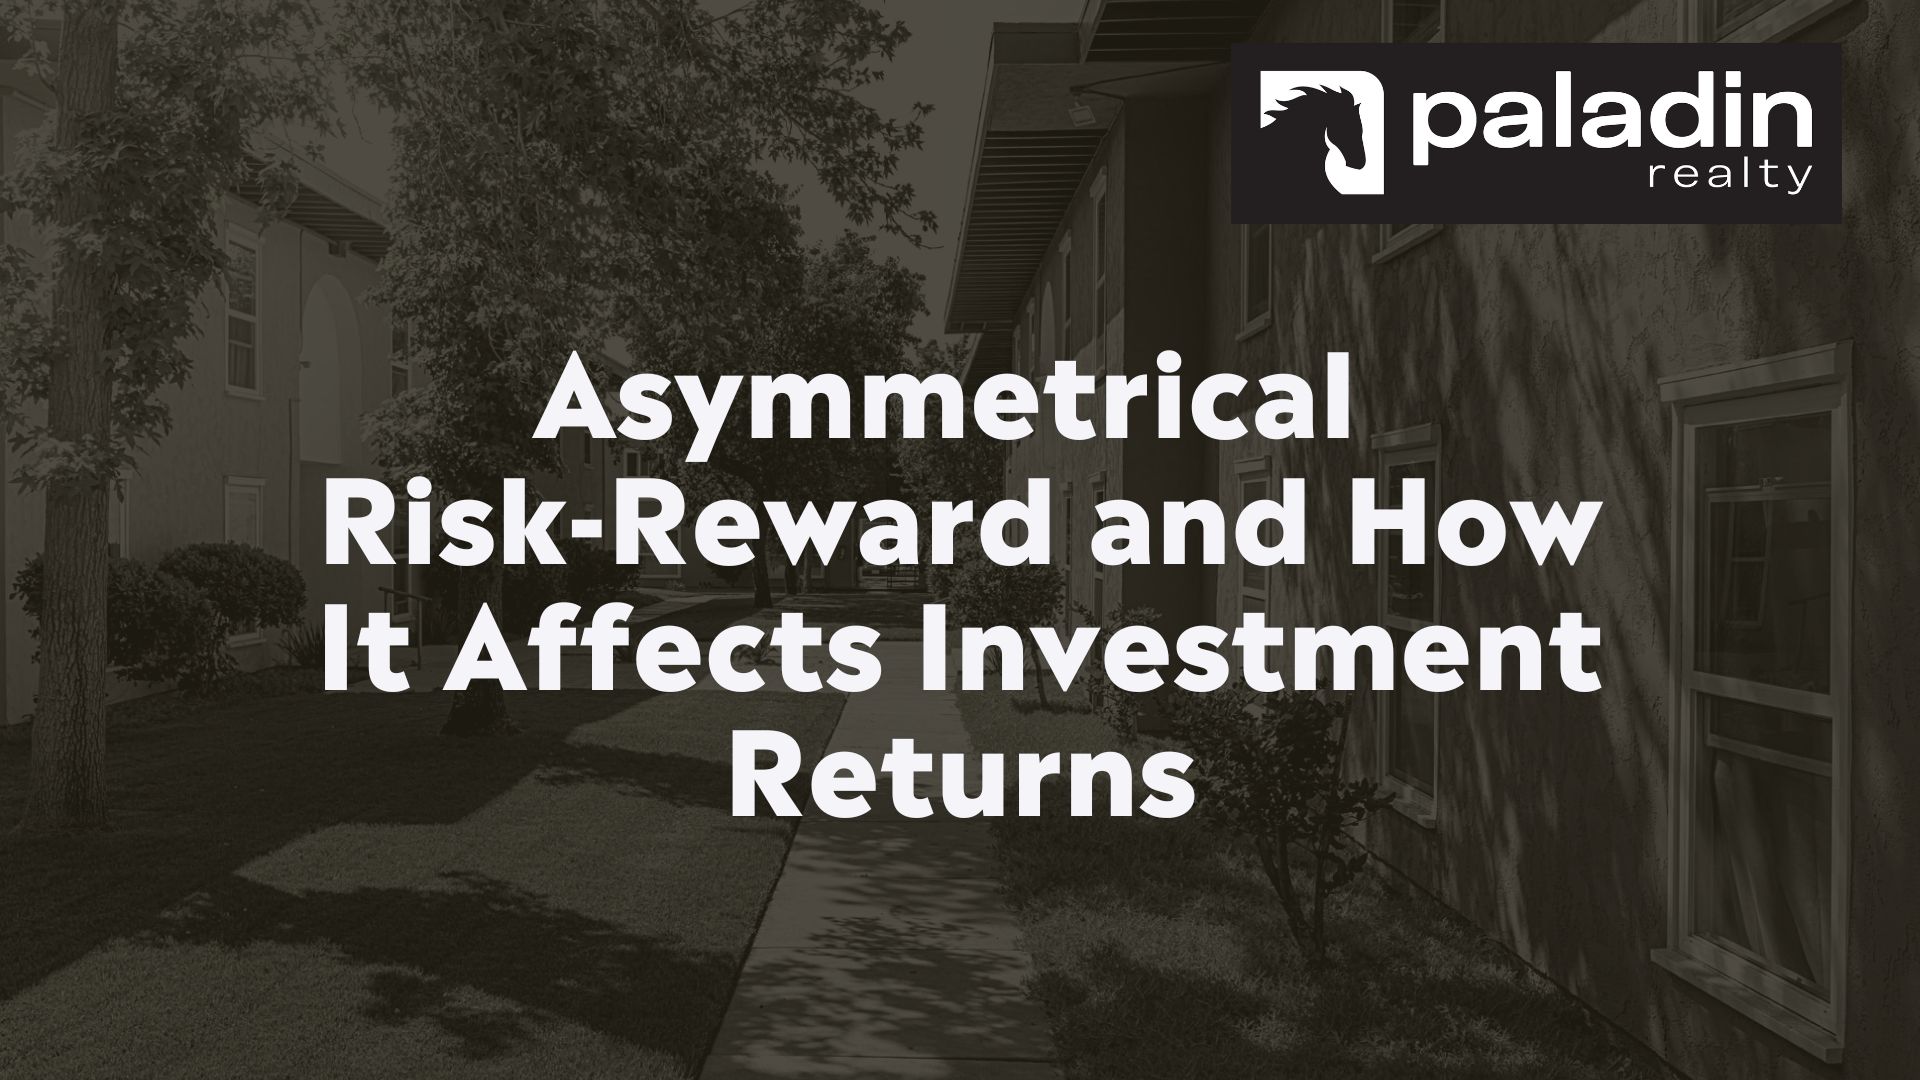 Fi [Web] Asymmetrical Risk-Reward and How It Affects Investment Returns